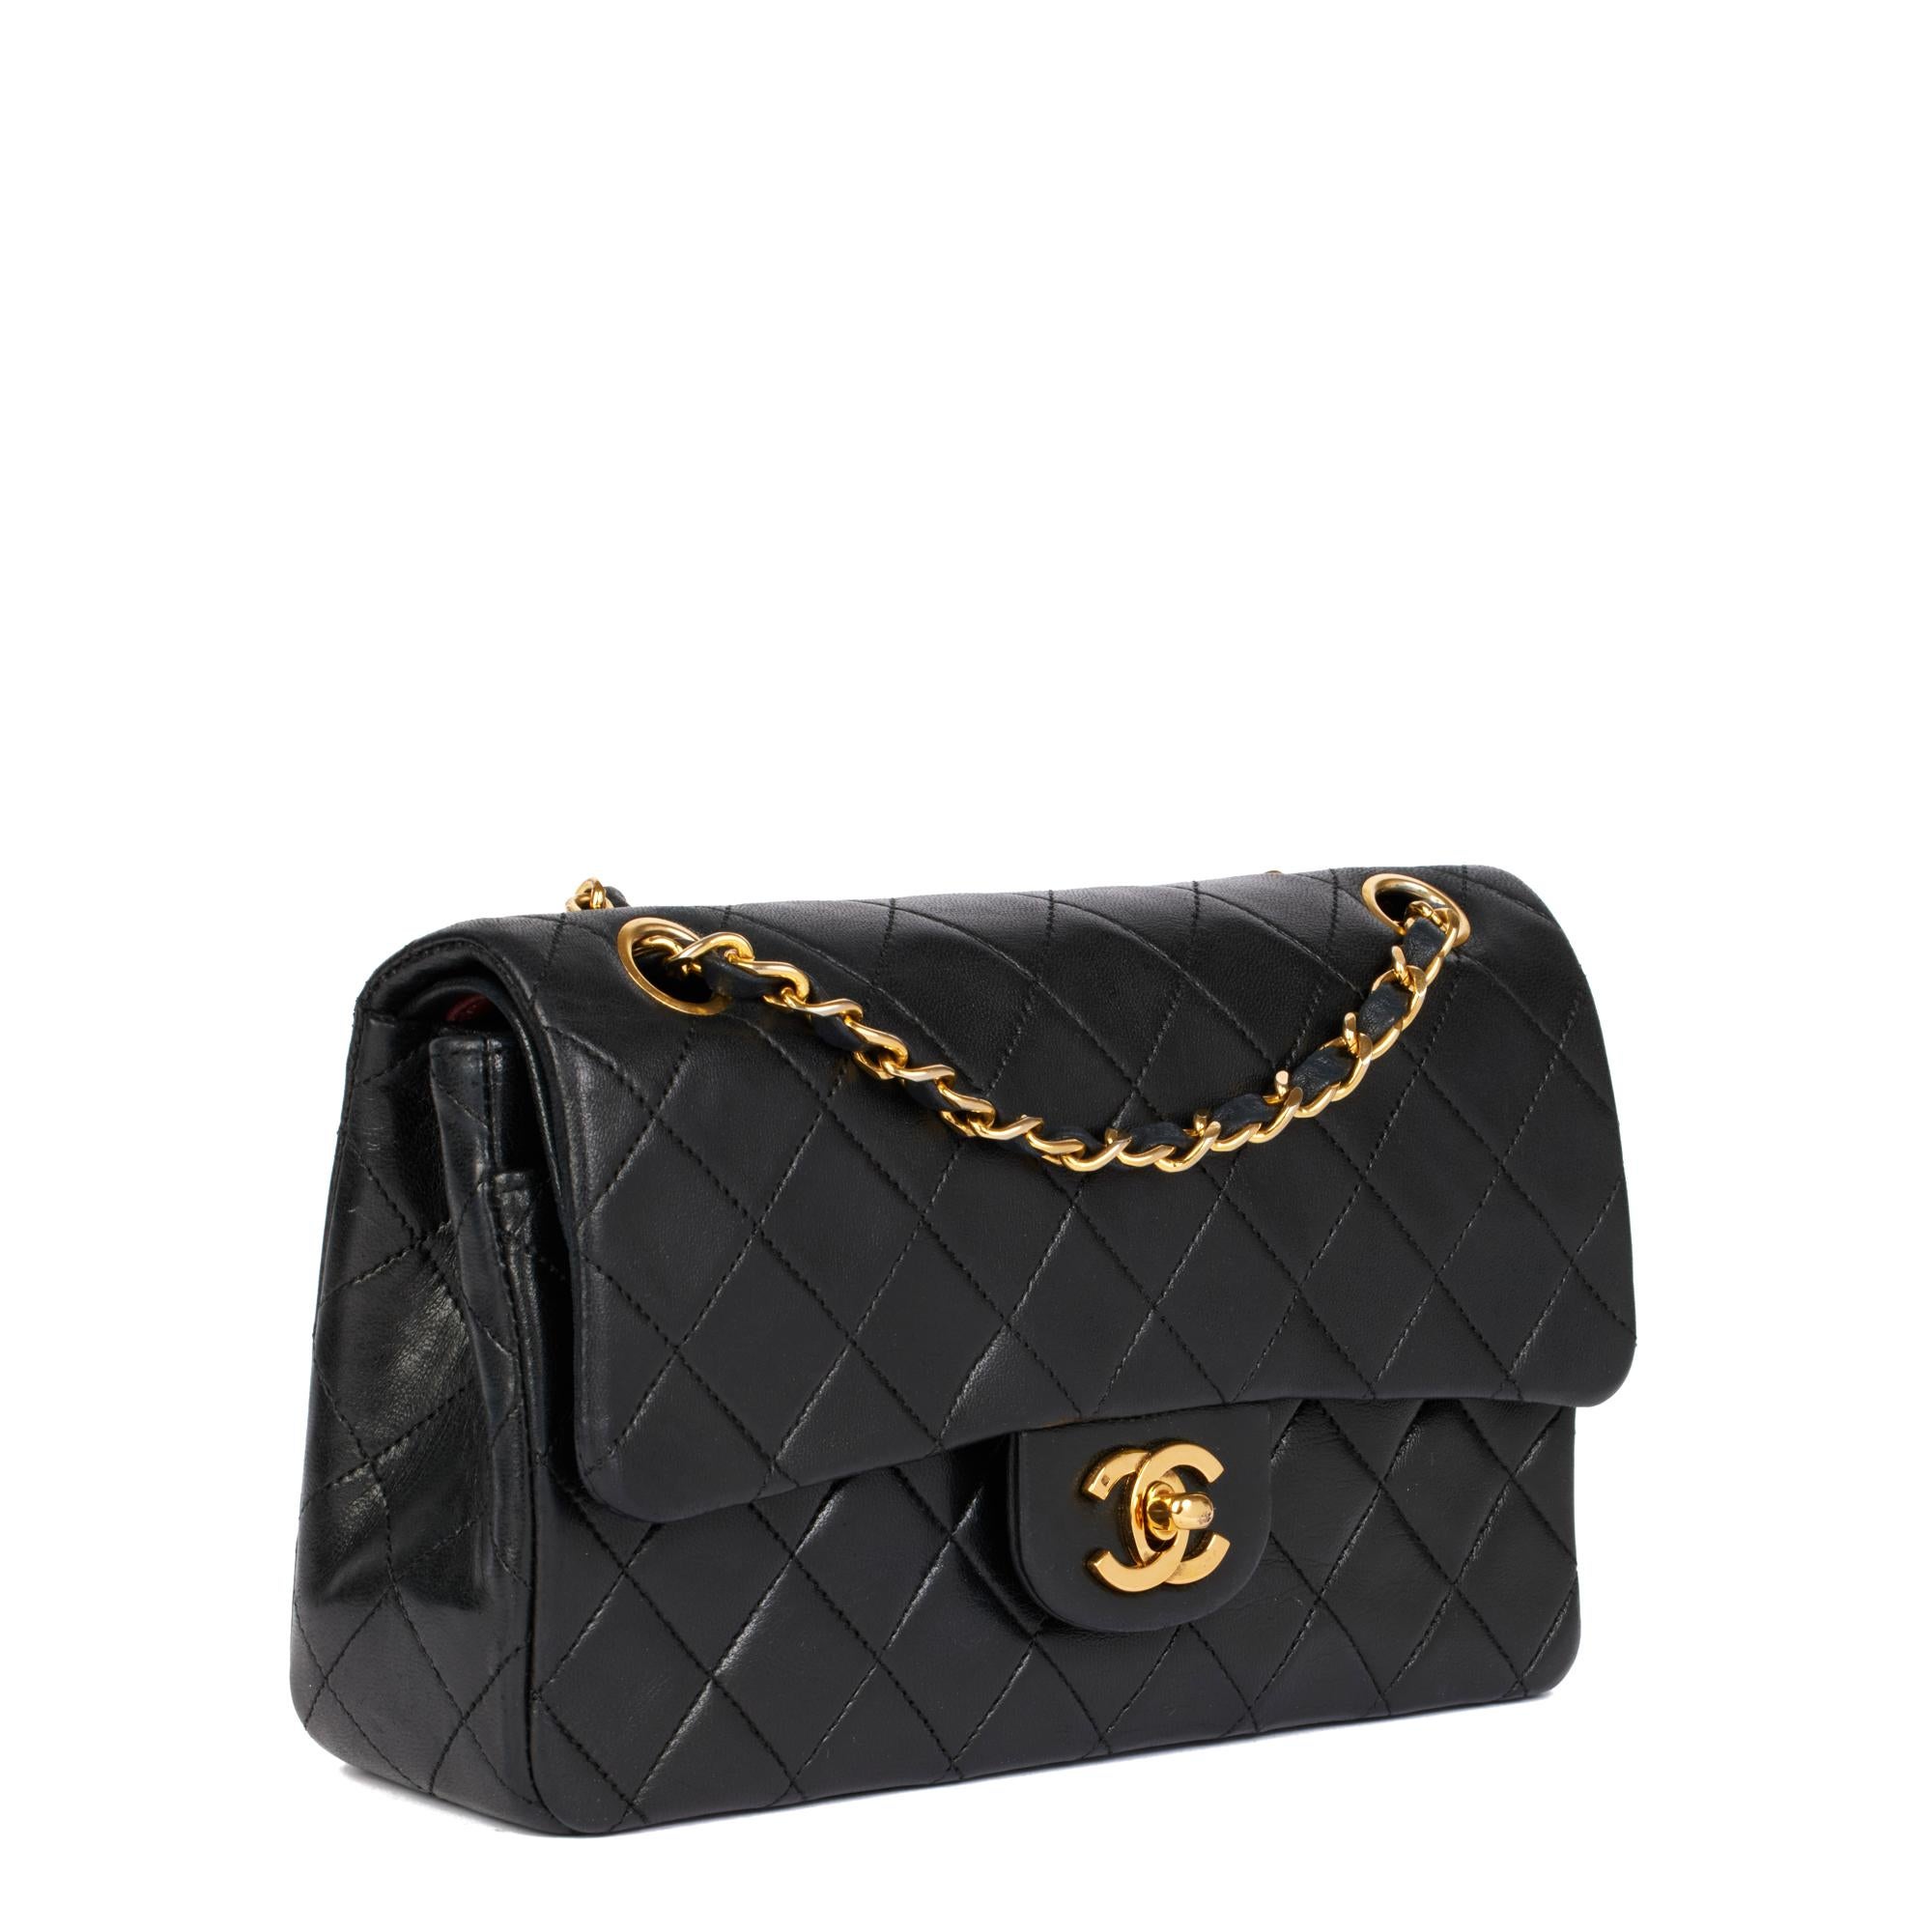 CHANEL
Black Quilted Lambskin Vintage Small Classic Double Flap Bag

Serial Number: 3256728
Age (Circa): 1994
Accompanied By: Chanel Dust Bag, Authenticity Card, Protective Felt
Authenticity Details: Authenticity Card, Serial Sticker (Made in